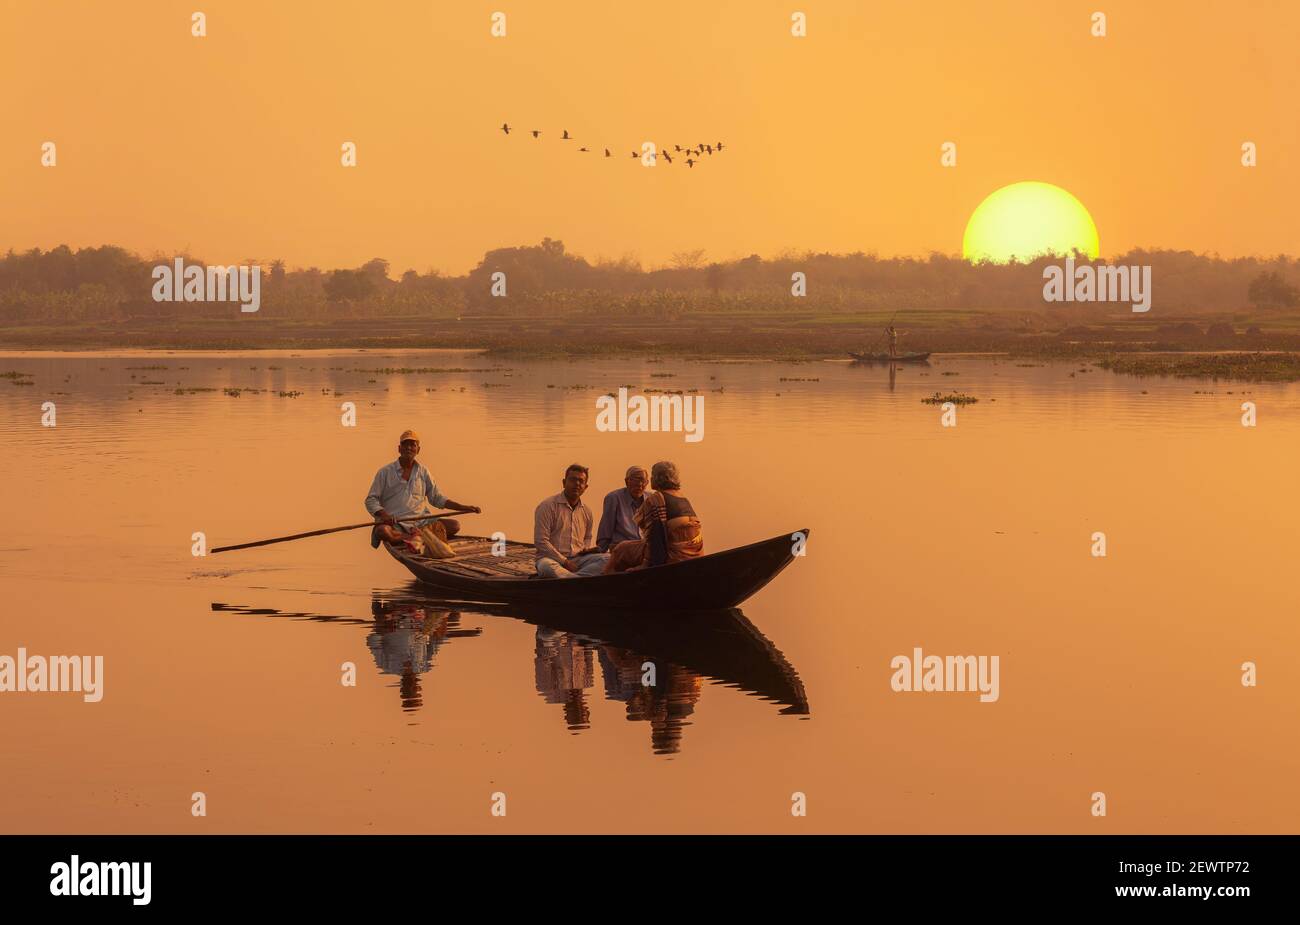 Family take a river boat ride at sunset with rural landscape at West Bengal, India Stock Photo